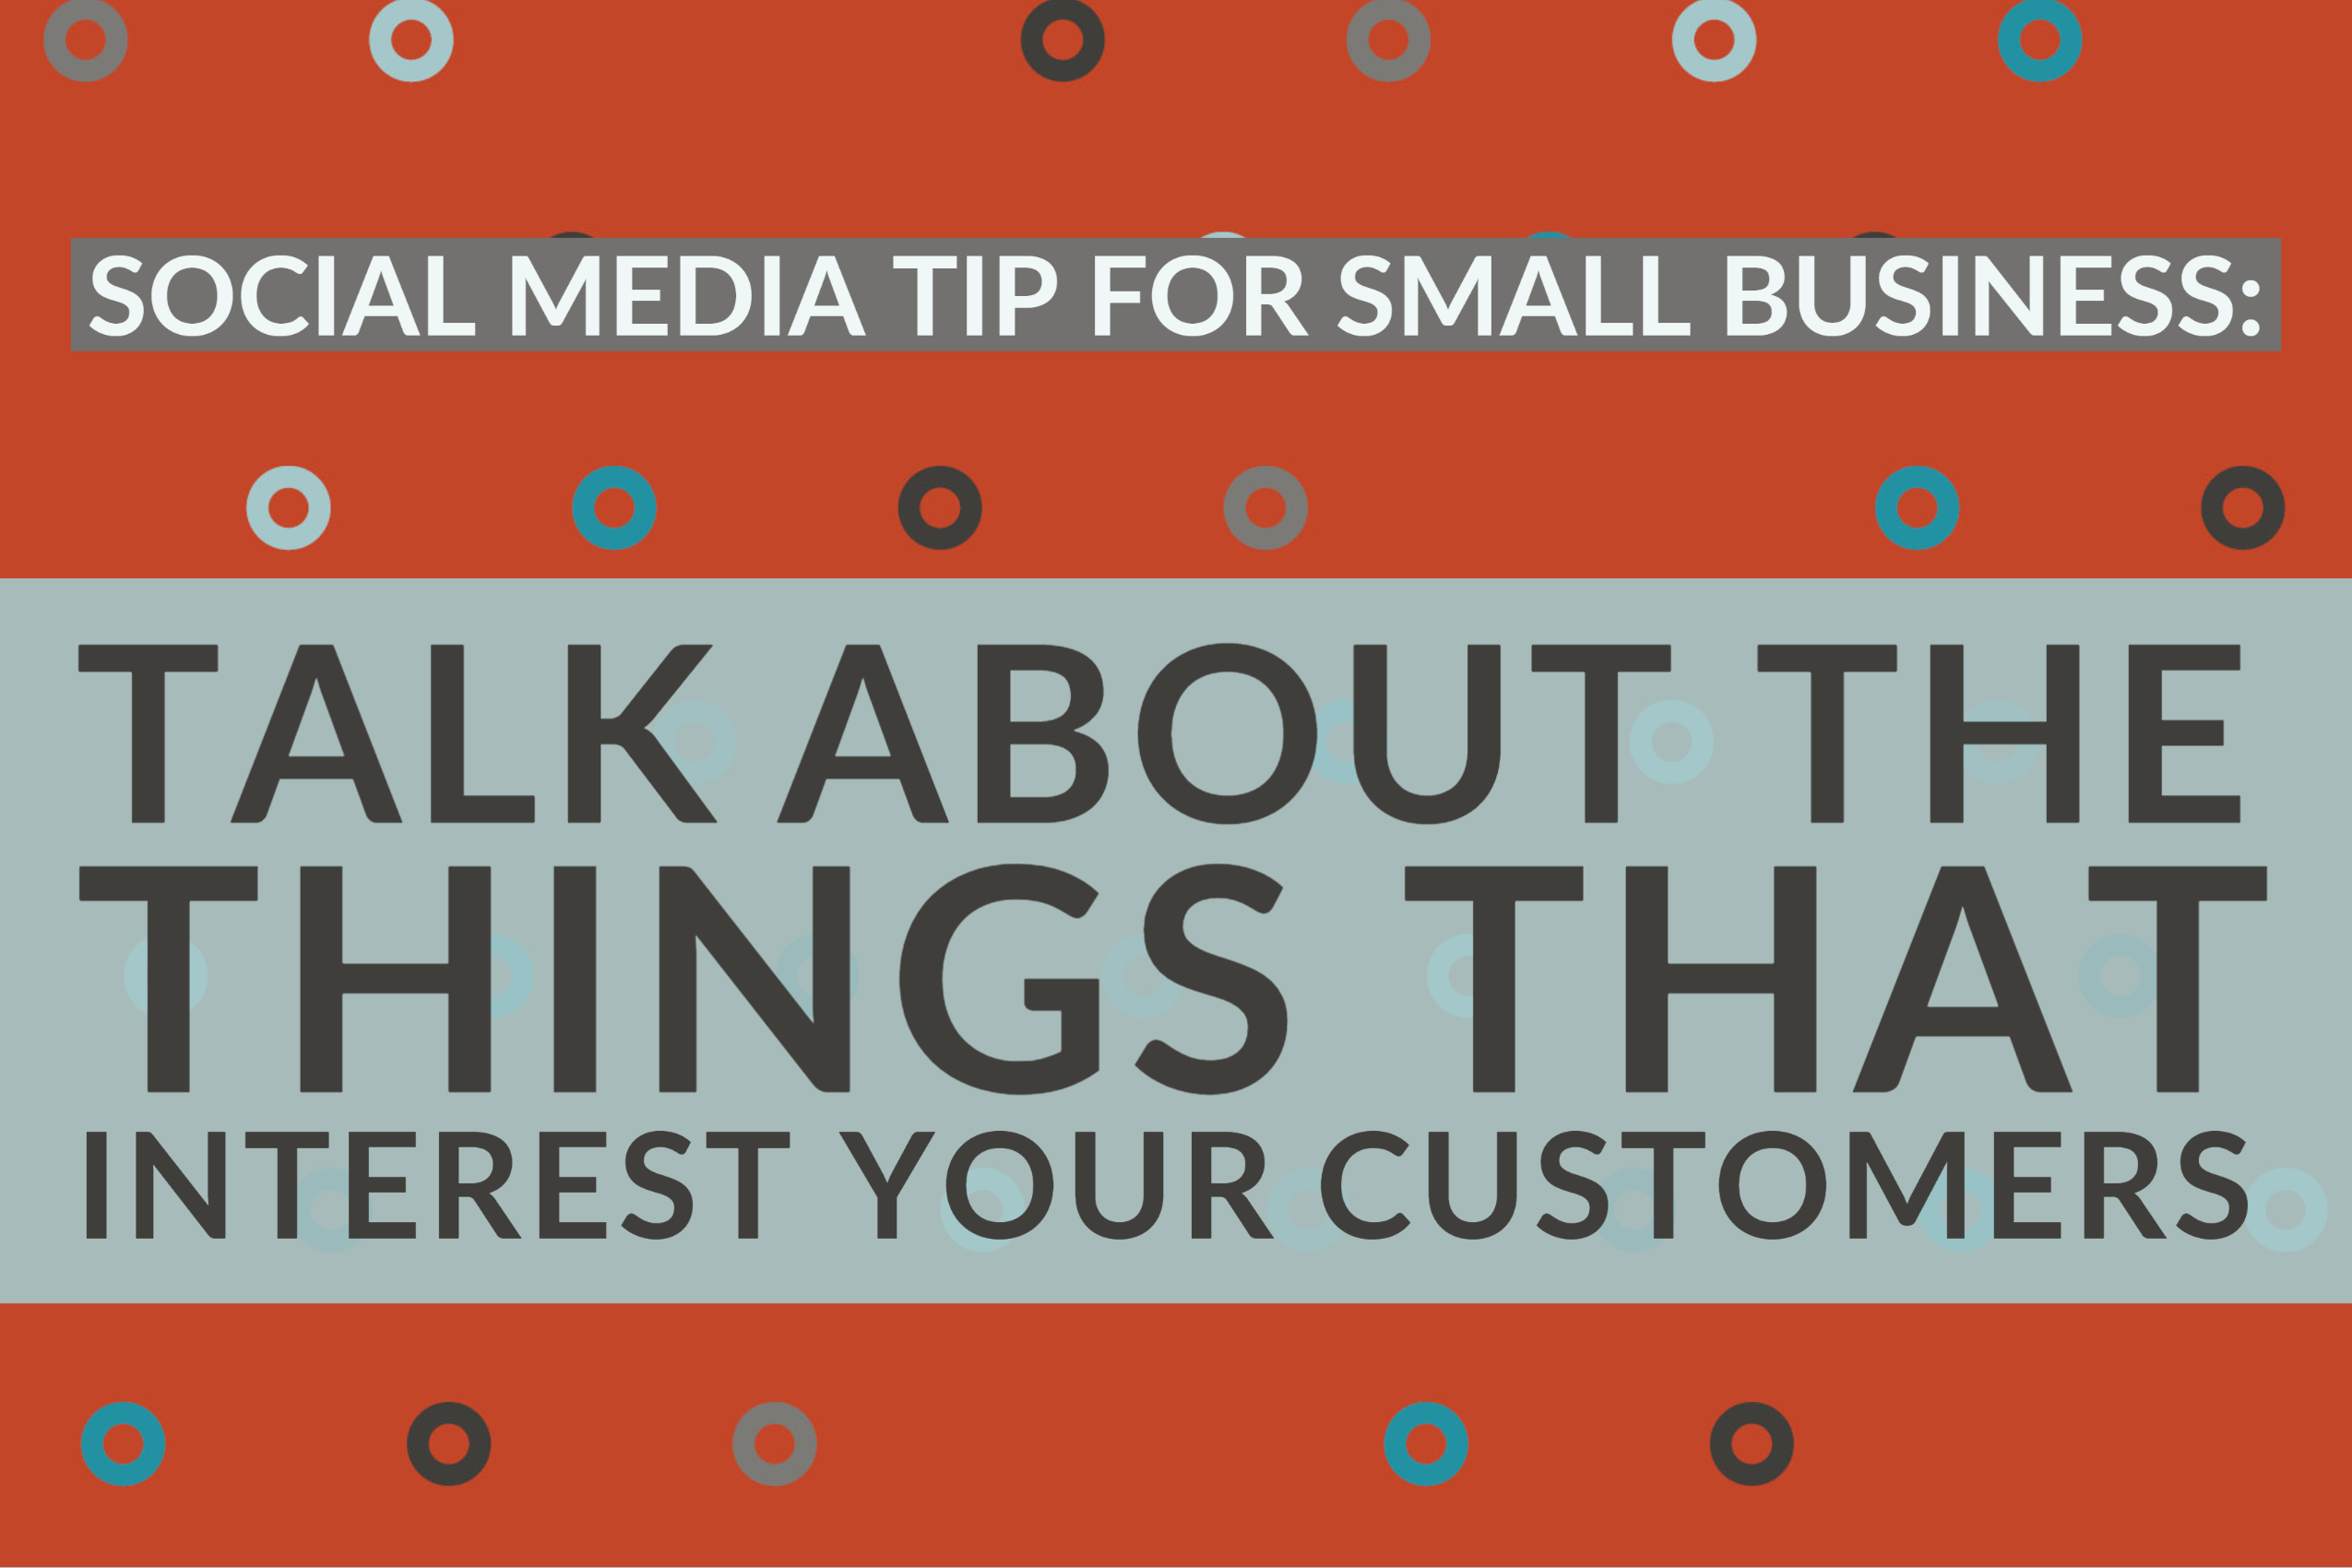 Social Media For Small Business Tip: Talk About The Things That Interest Your Customers